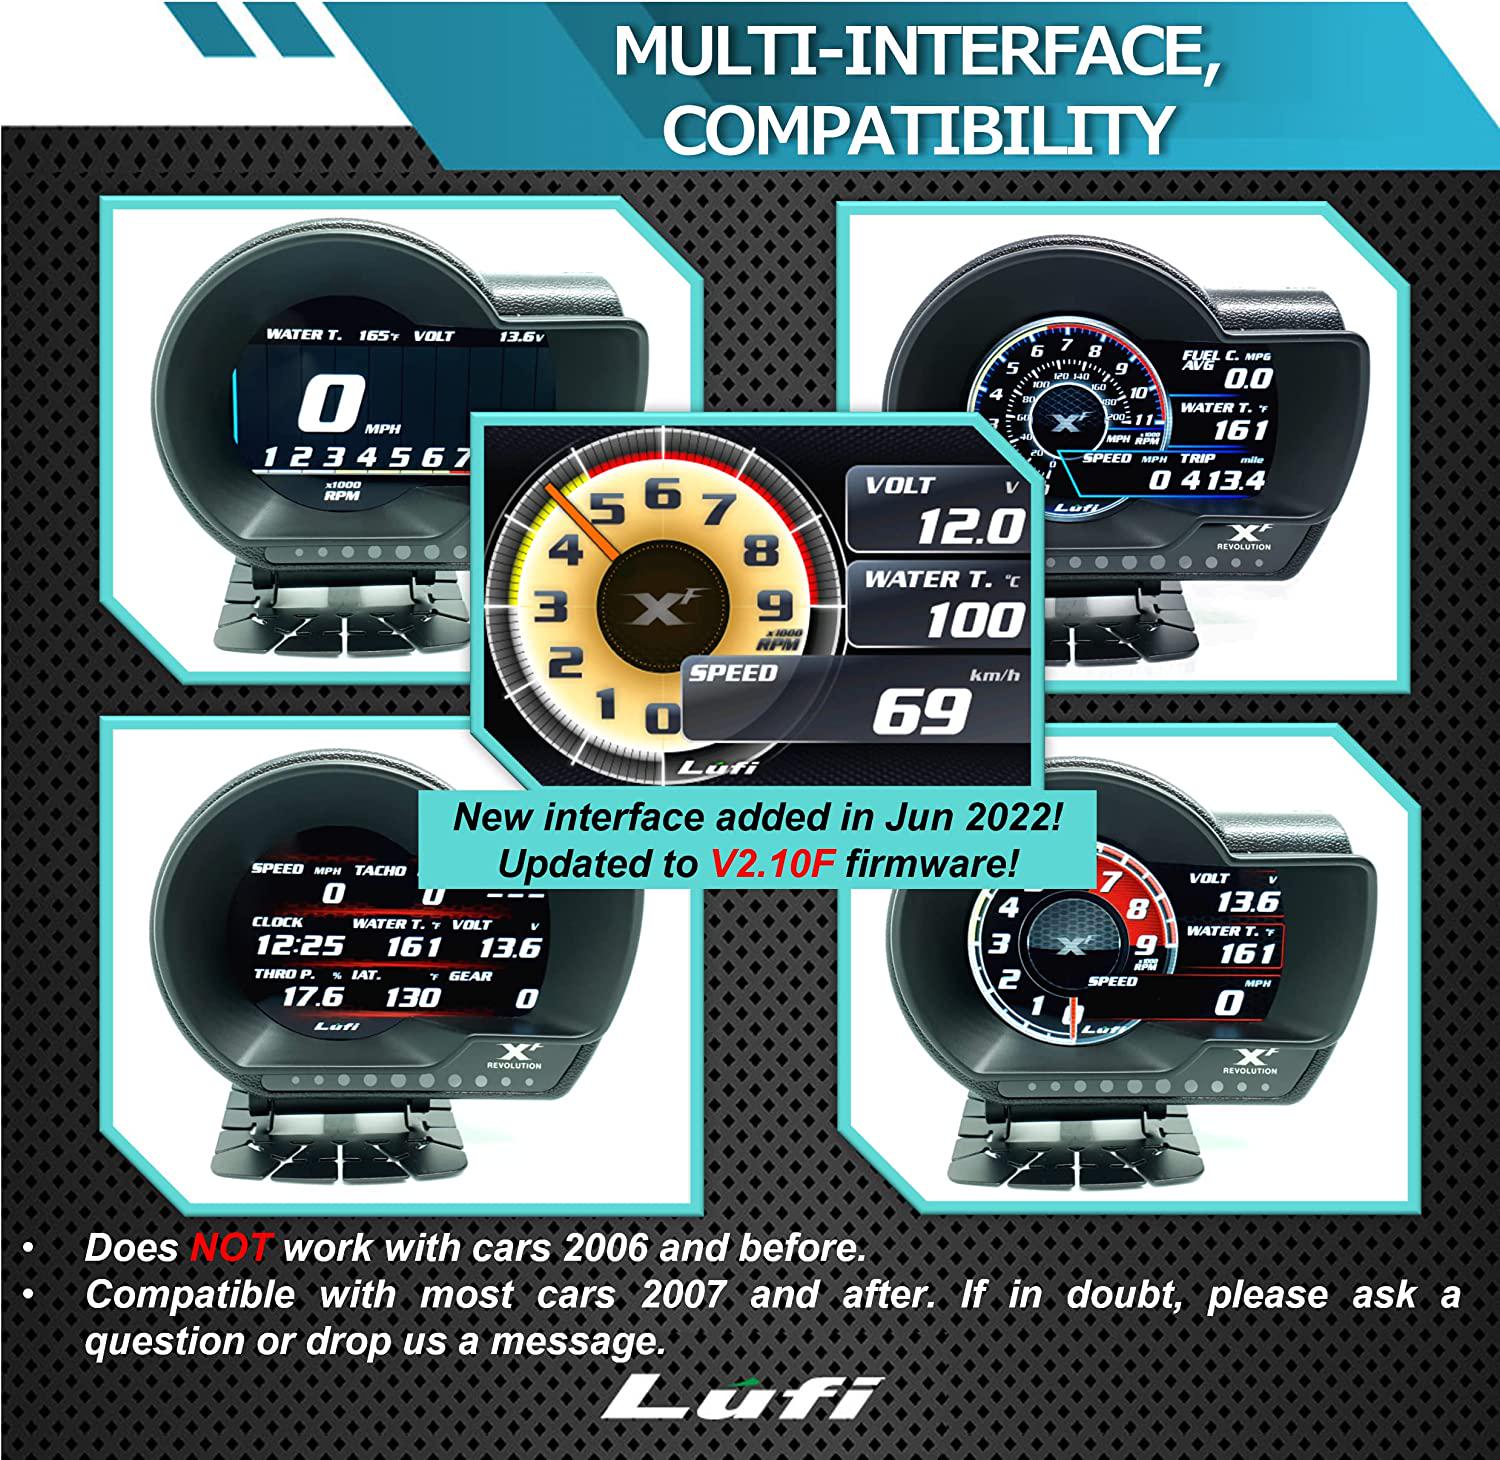 Lufi, Lufi XF Revolution OBD2 Gauge Display, Multi-Data Monitor, Head Up Display, Highly Customizable, Accurate and Fast Response [for Most Cars 2007 and After]